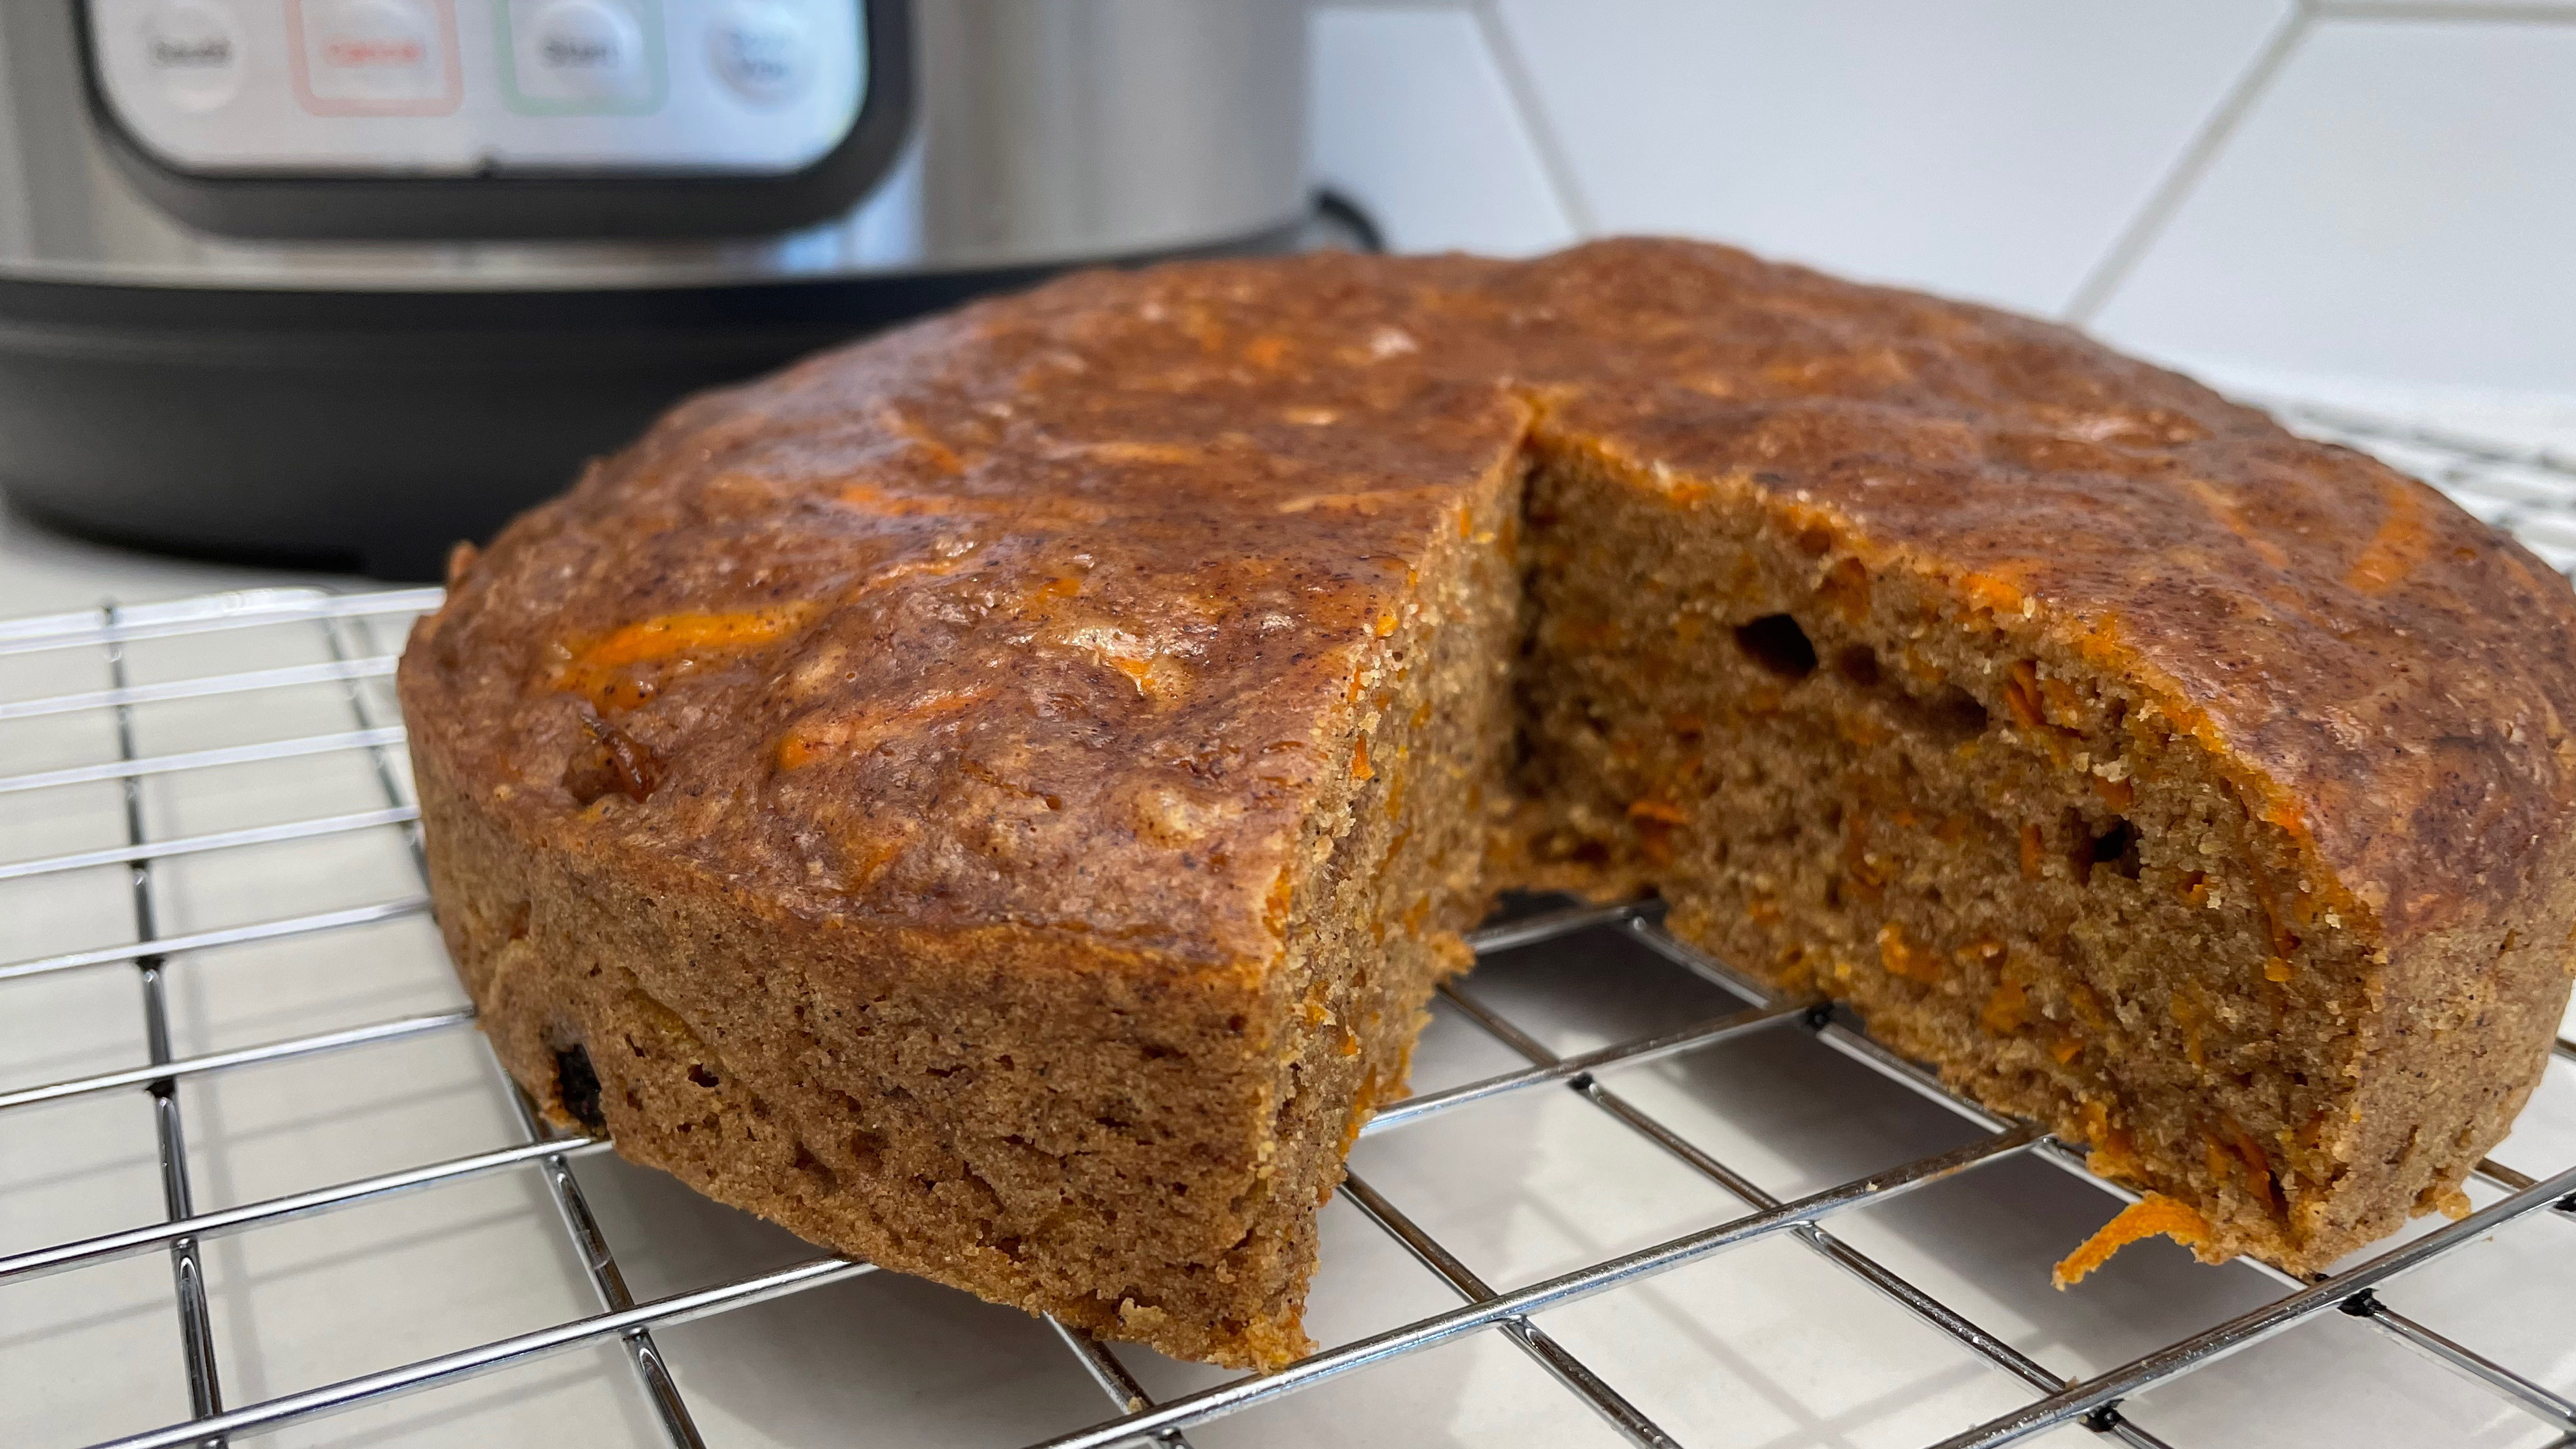 A carrot cake baked in an Instant Pot